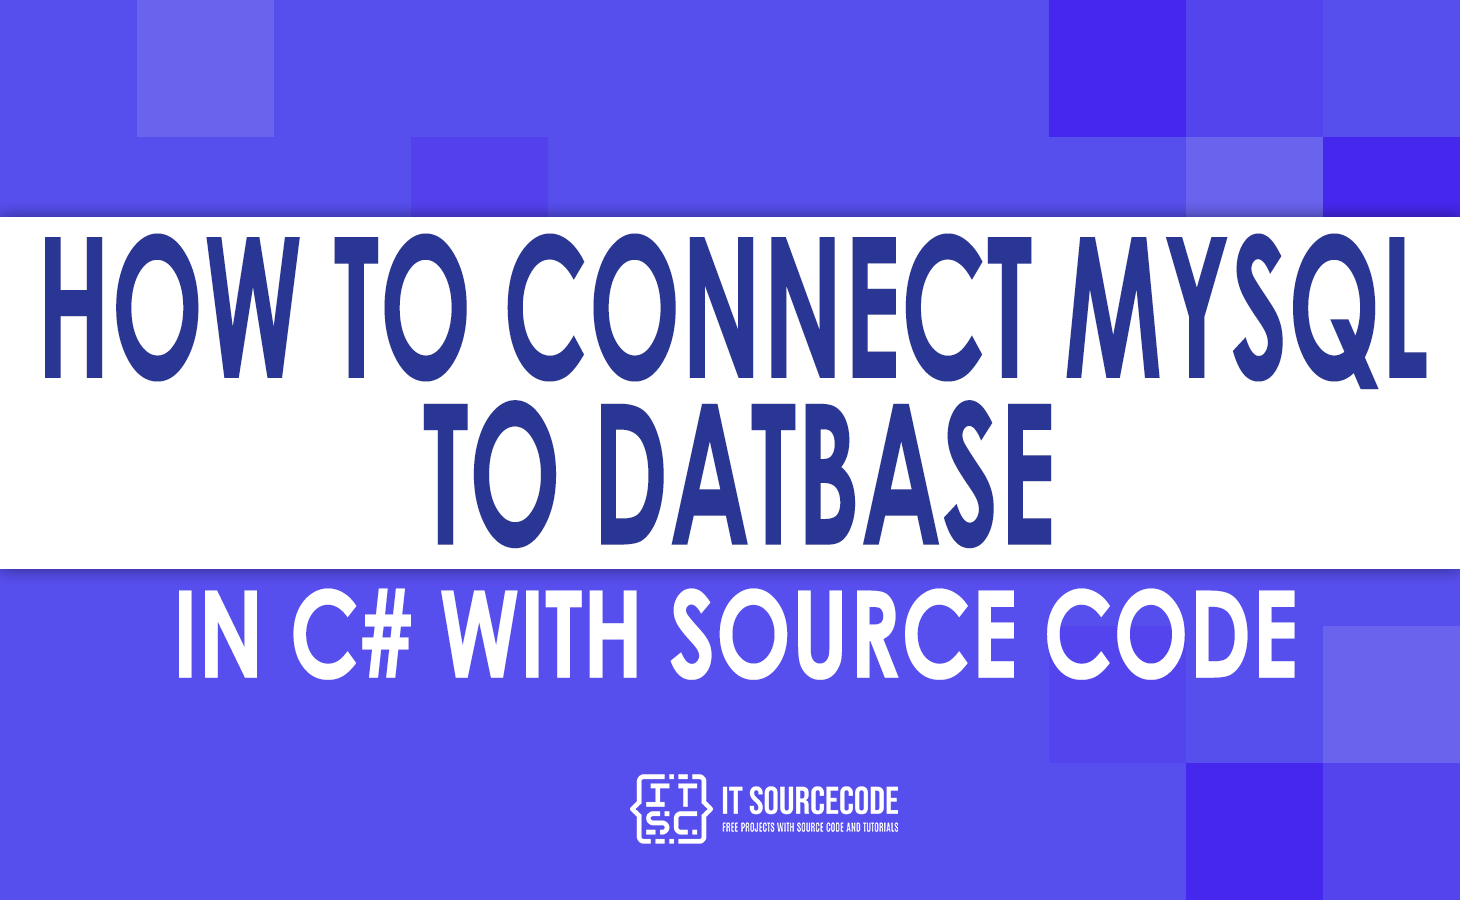 How to Connect MySQL to Database in C#